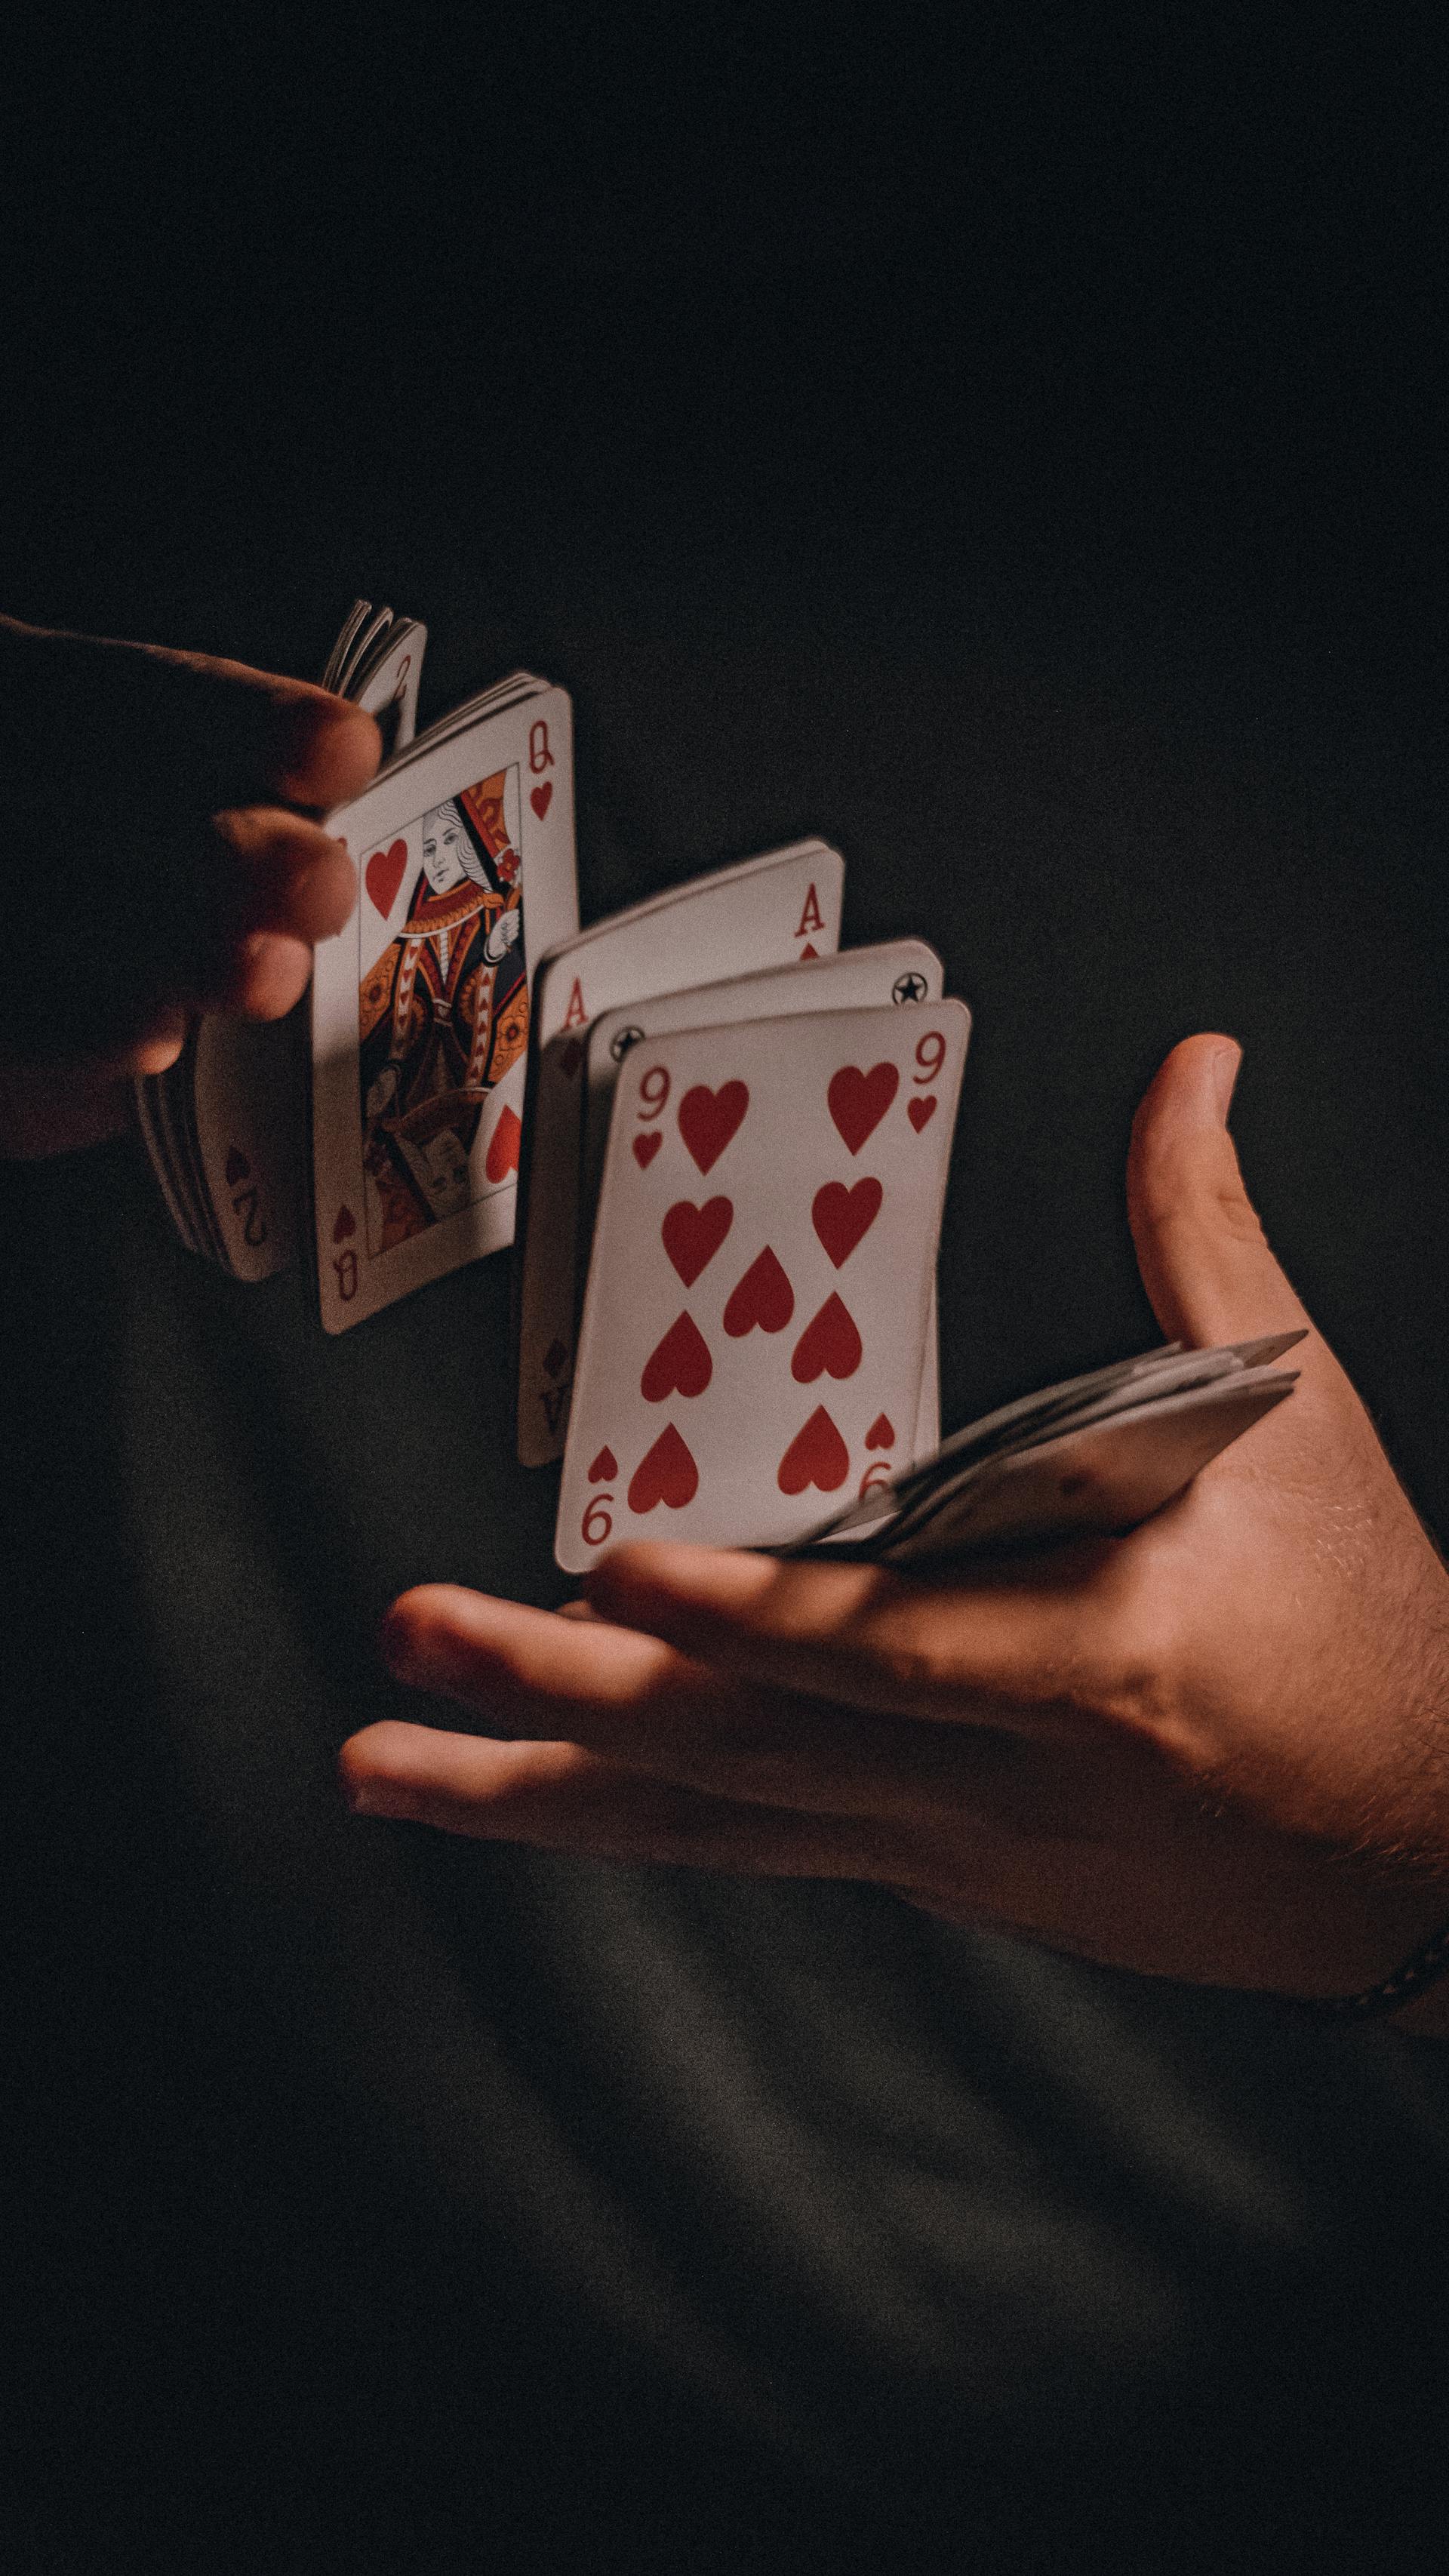 A person shuffling cards | Source: Pexels